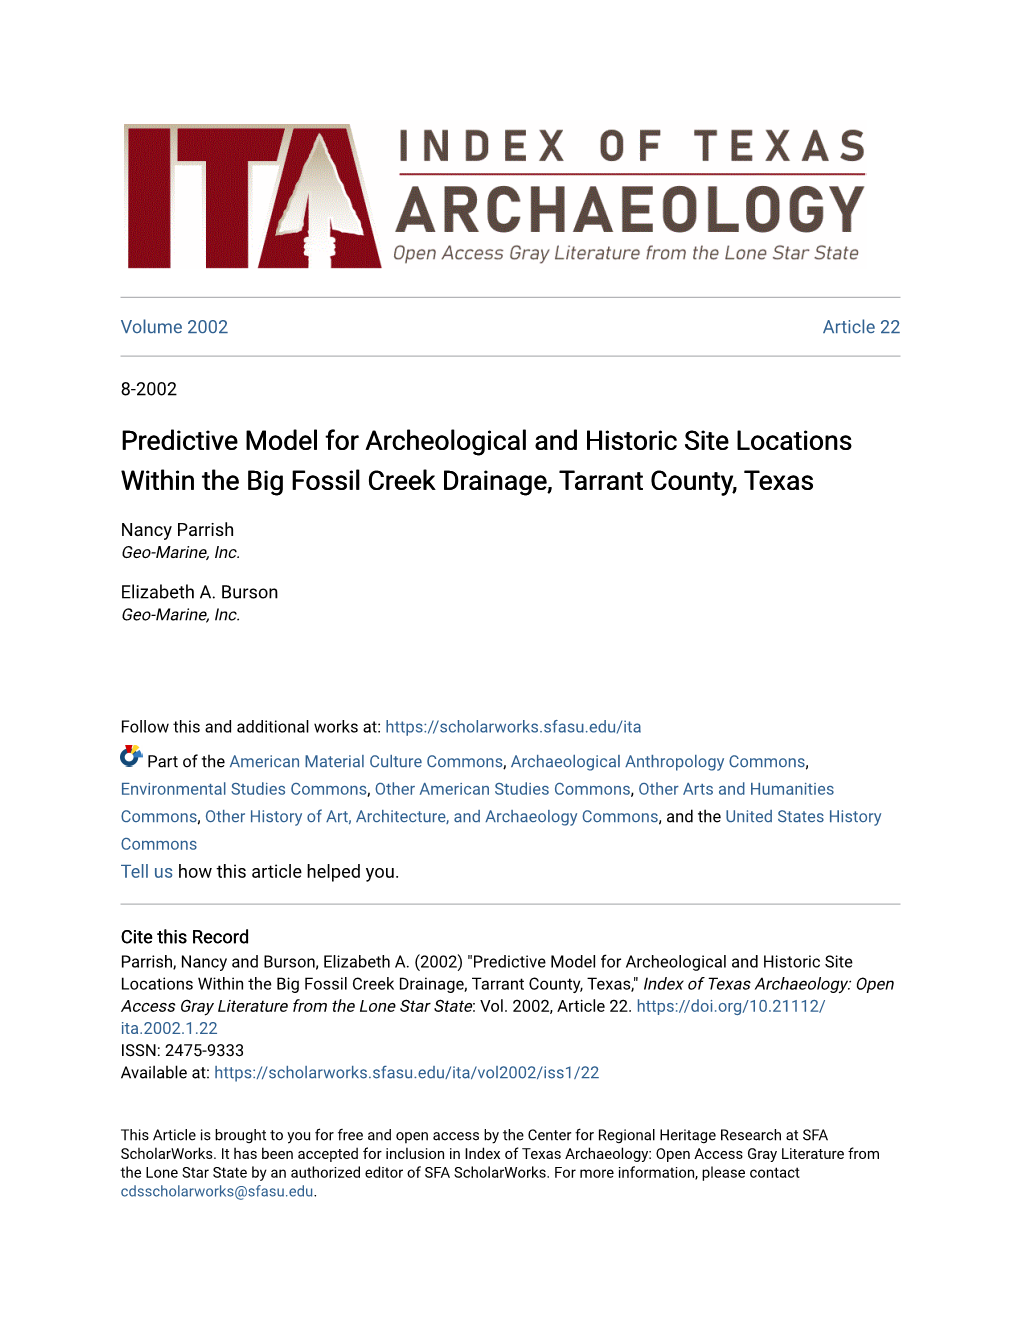 Predictive Model for Archeological and Historic Site Locations Within the Big Fossil Creek Drainage, Tarrant County, Texas